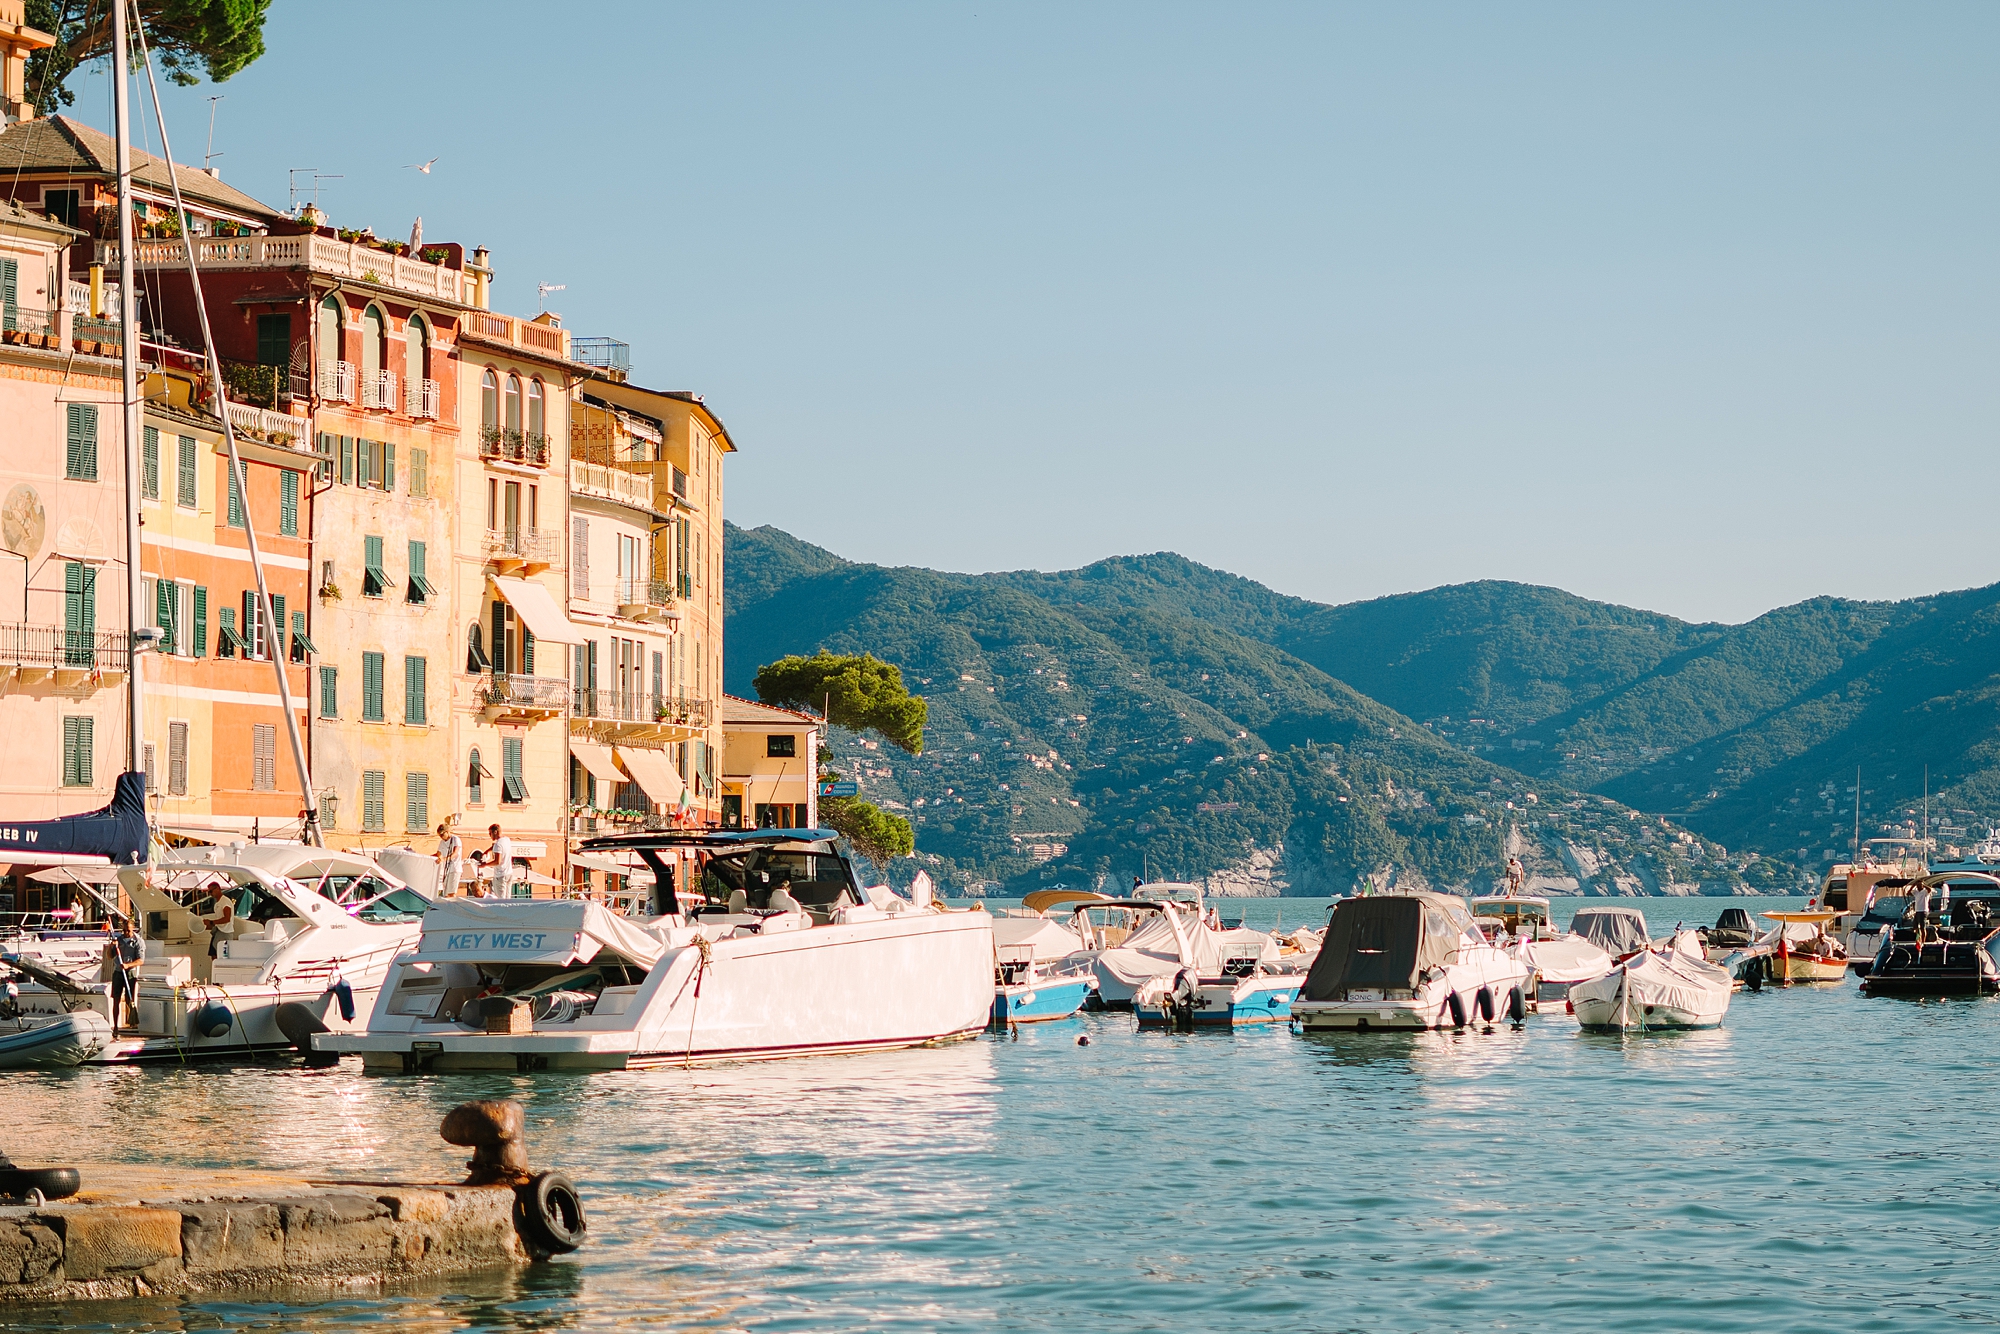 photographer Amy Allmand shares her trip to Italy in 2023 including her favorite stops including the Italian Riviera